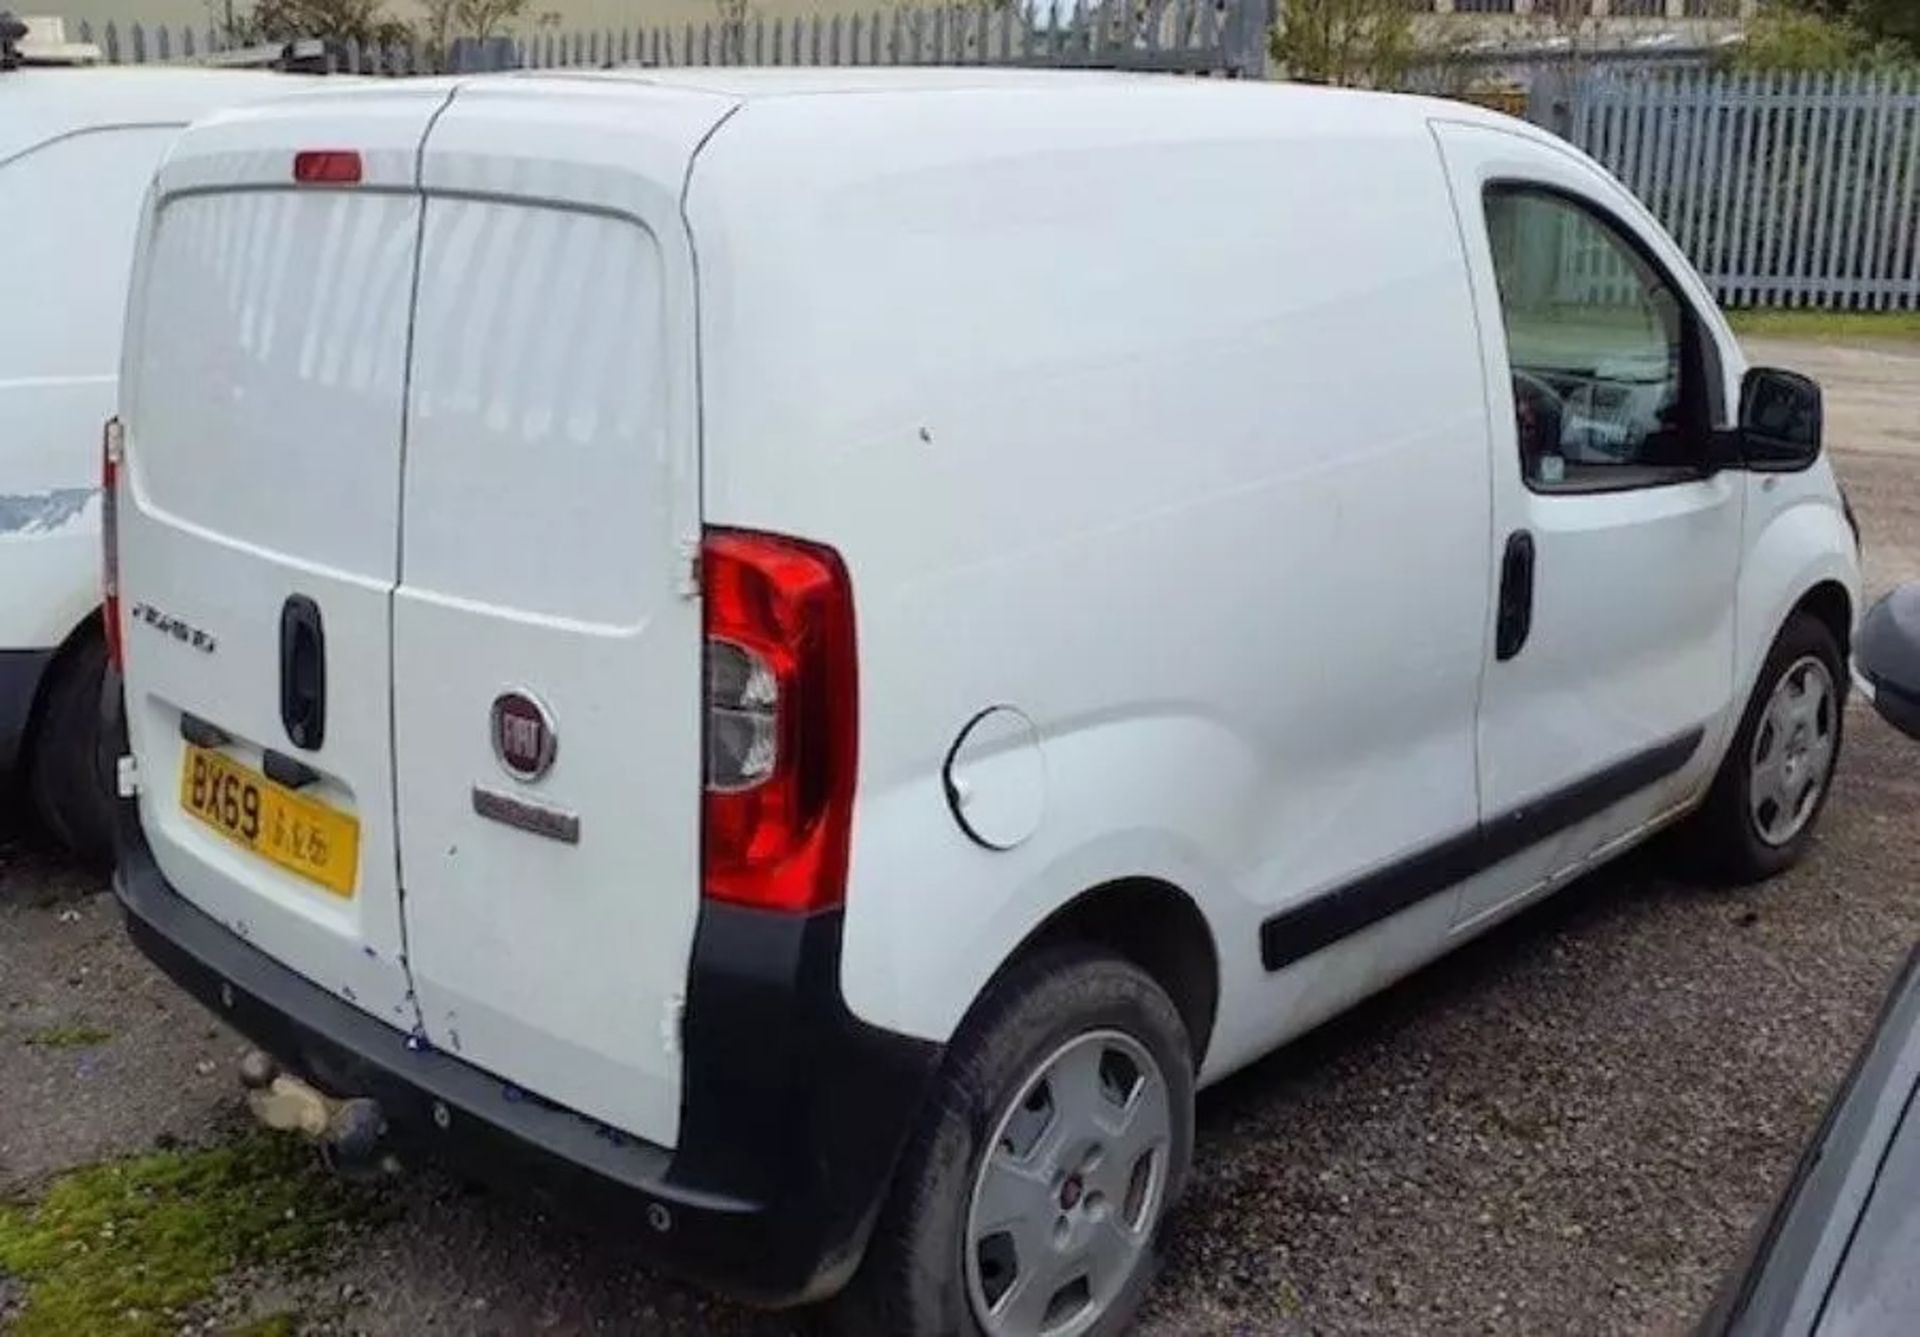 2019 FIAT FIORINO HDI VAN - 1 OWNER, SOLD AS NON-RUNNER, V5 LOG BOOK PRESENT (SPARES OR REPAIRS) - Image 2 of 7